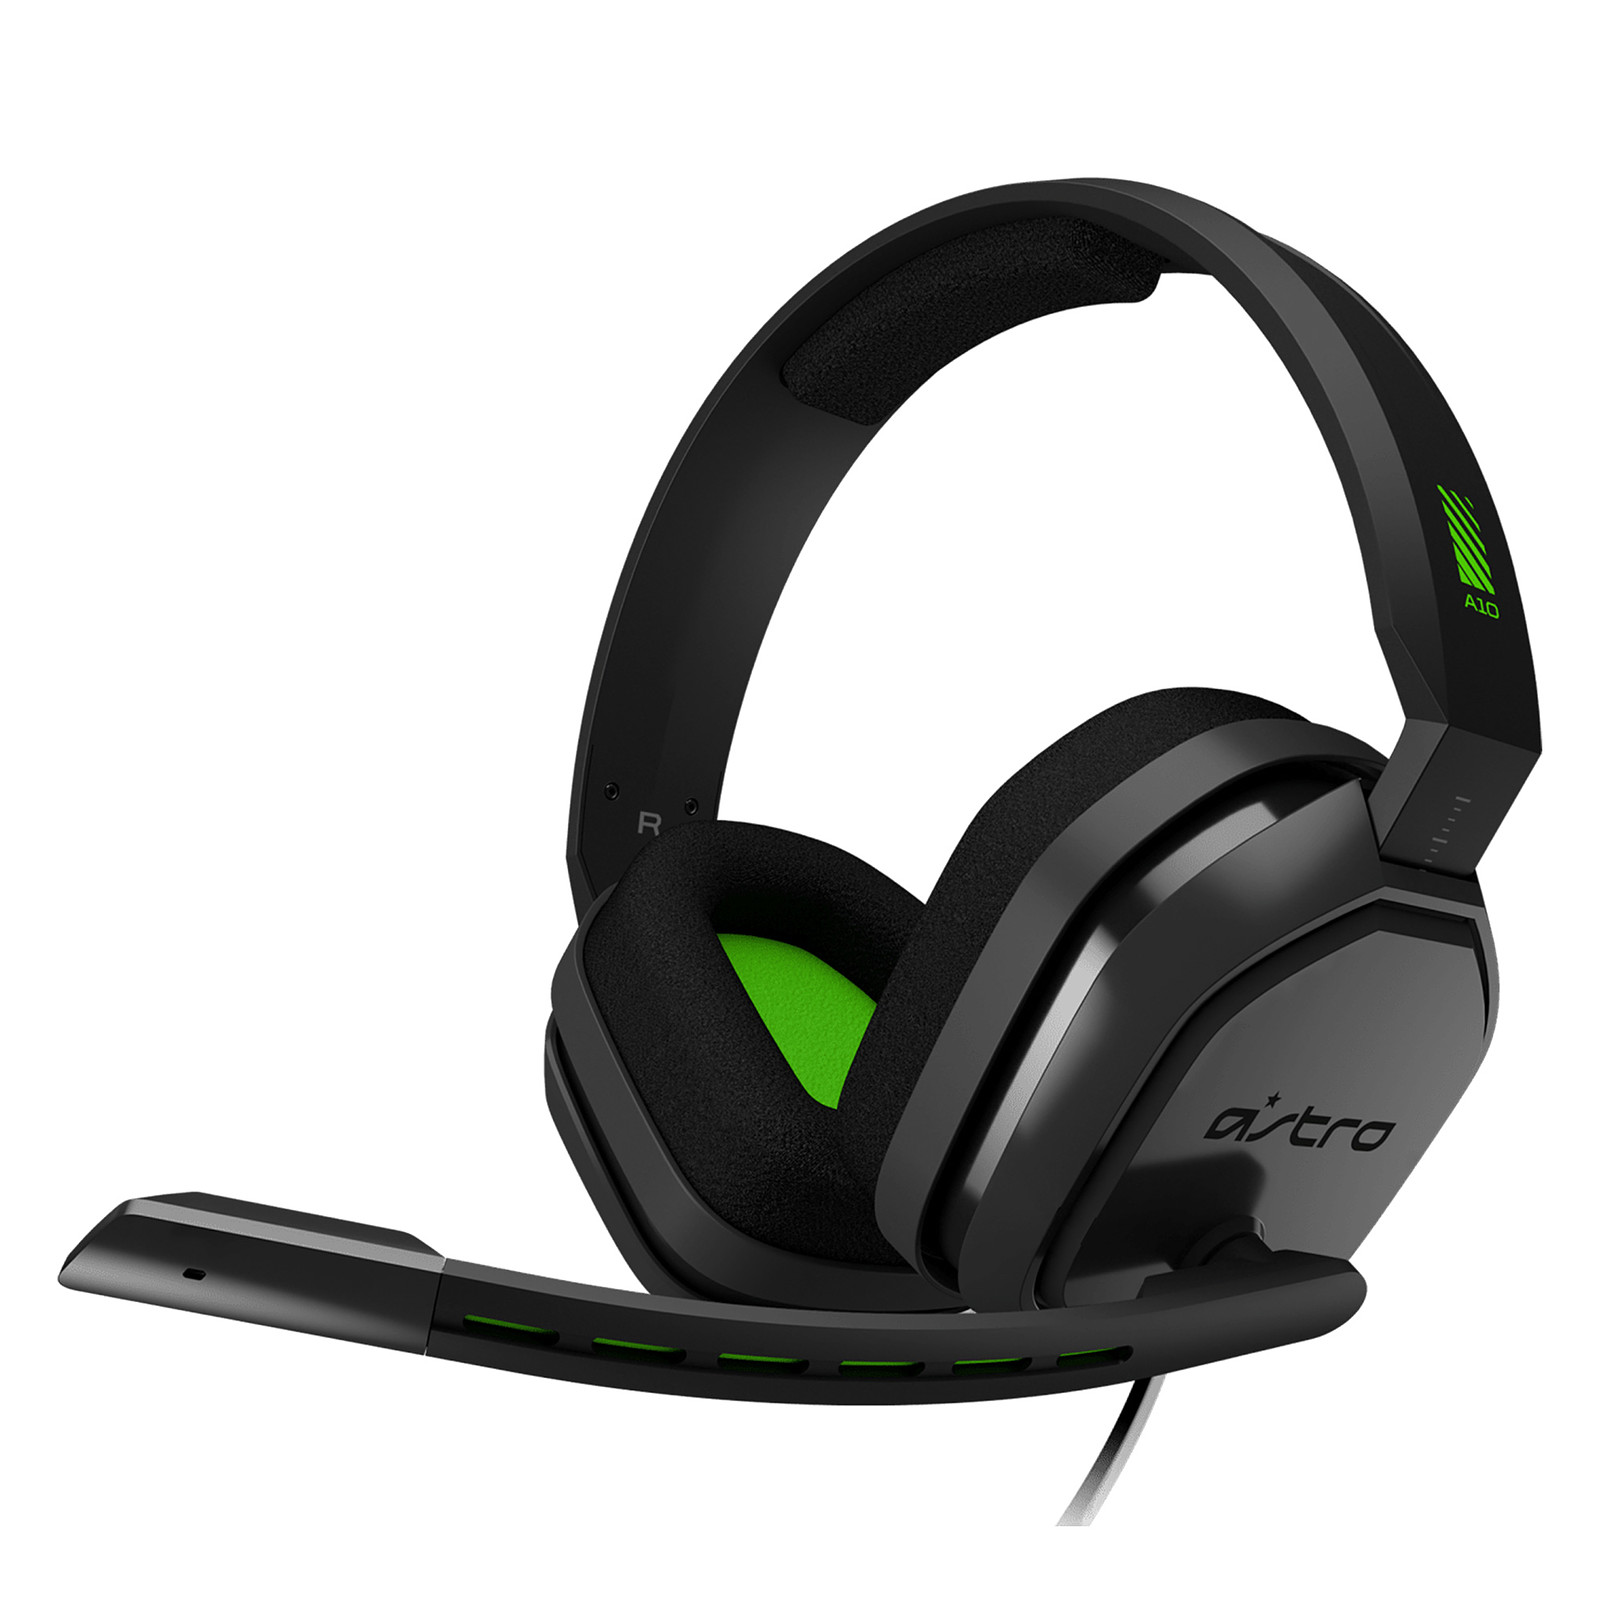 Astro A10 Gris/Vert (PC/Mac/Xbox One/PlayStation 4/Switch/Mobiles) - Micro-casque Astro